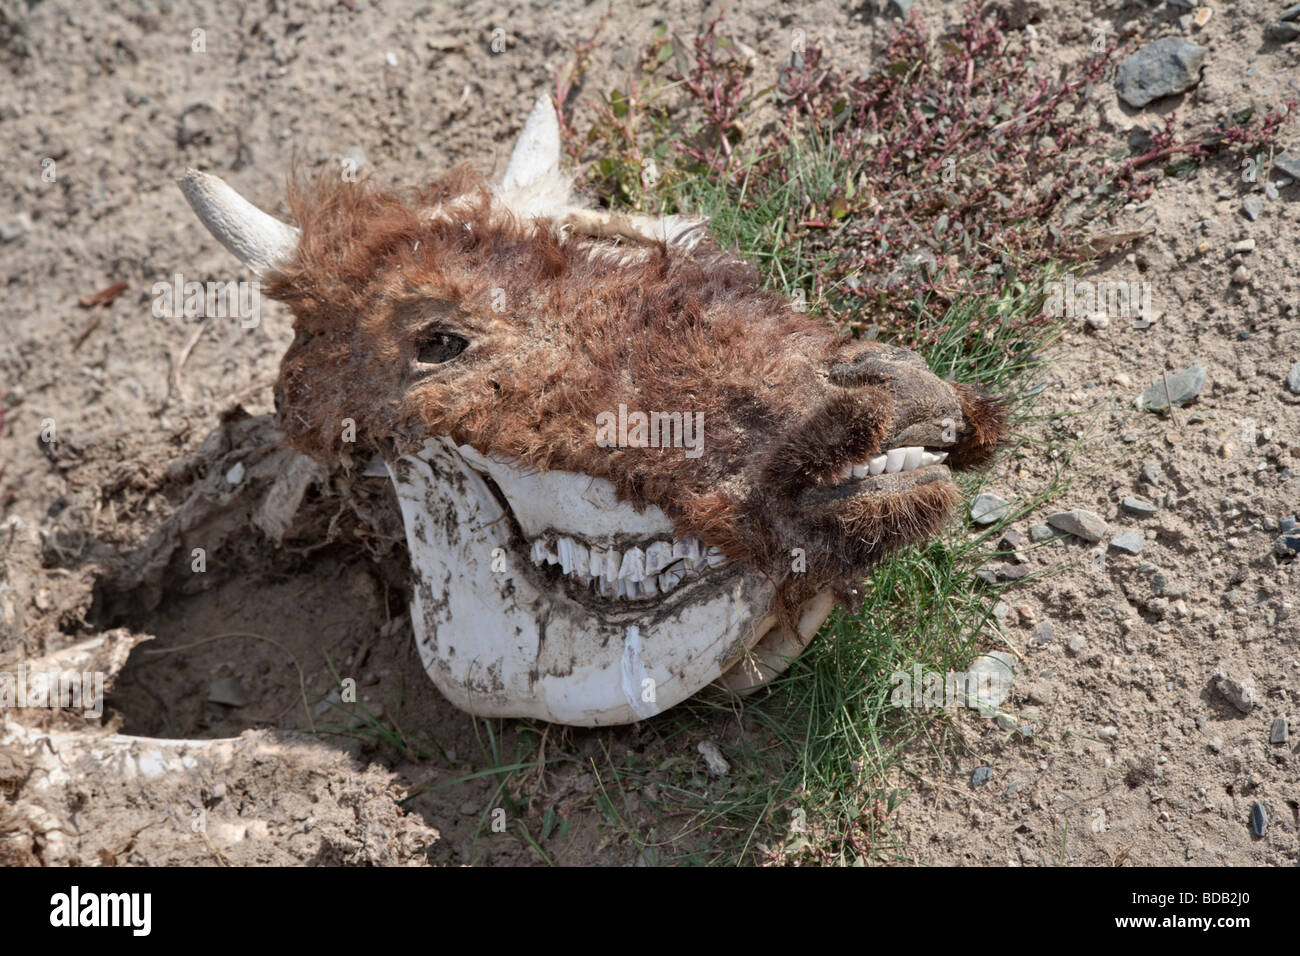 Yak skull on the Mongolian steppe, north central Mongolia. Mongolia has a very harsh climate and life can be difficult there. Stock Photo